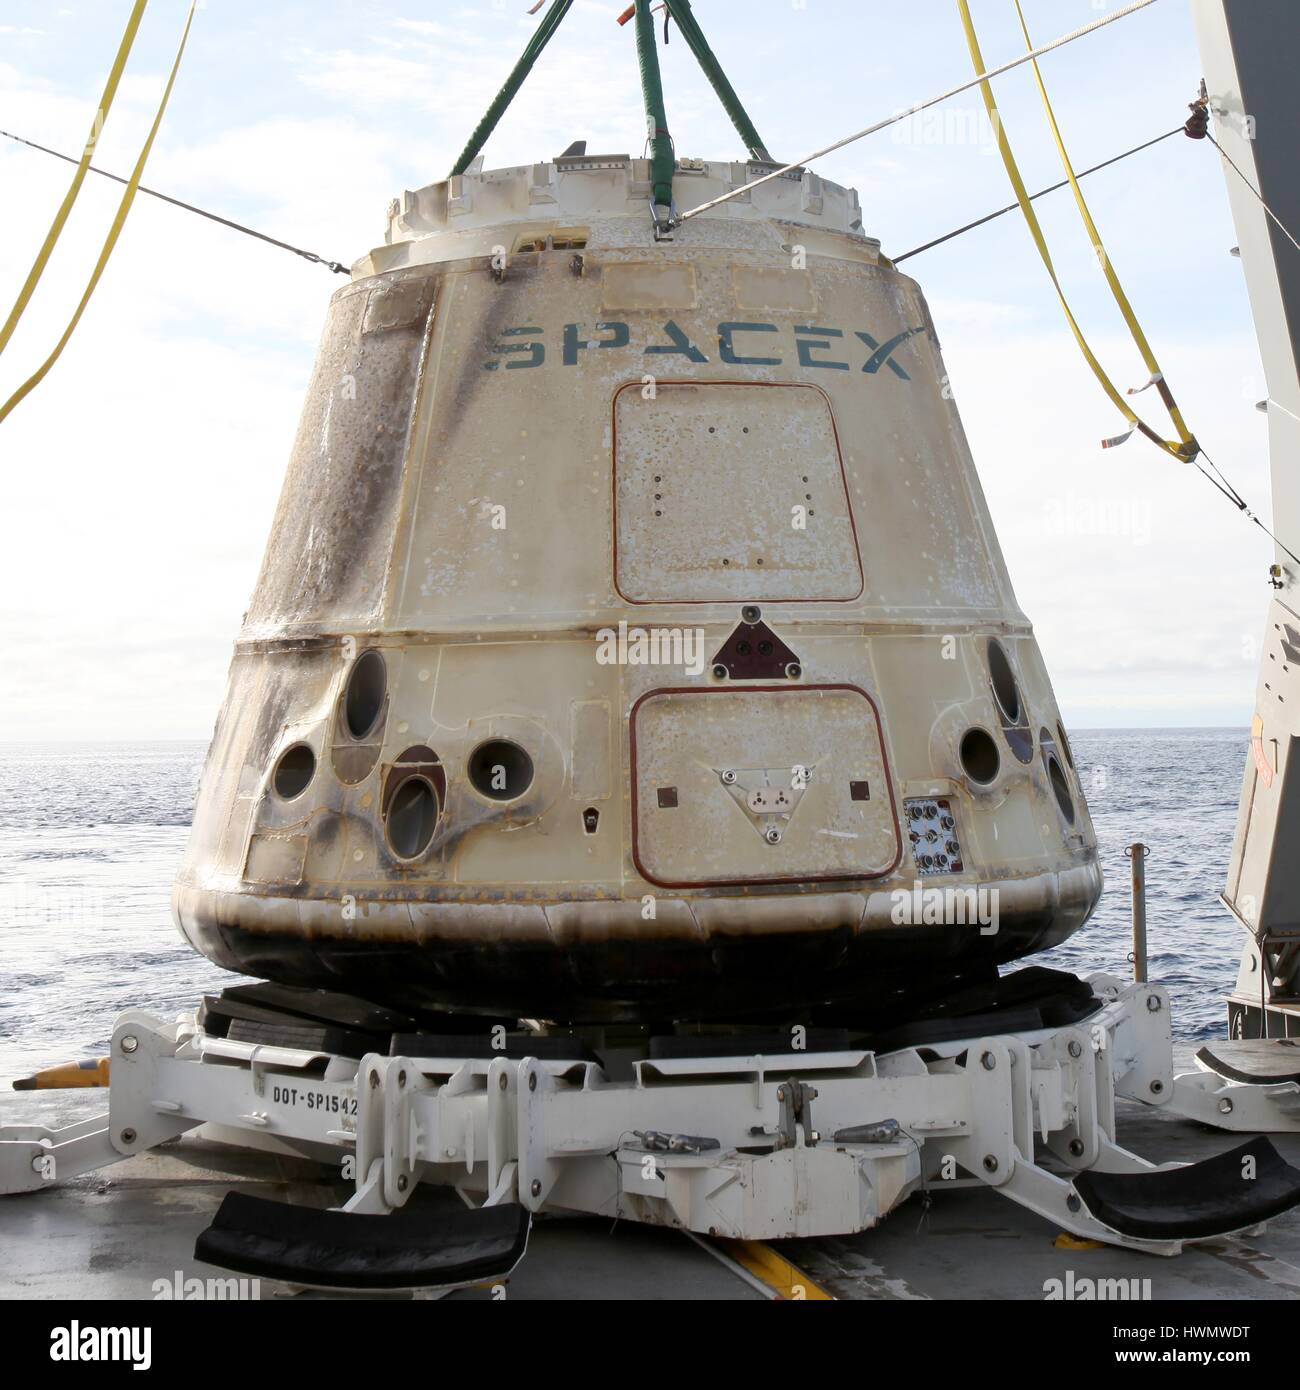 The SpaceX Dragon cargo supply capsule is recovered from the Pacific Ocean onto the deck of the NRC Quest after returning from the International Space Station March 19, 2017 off the coast of Baja, California. The capsule returned carrying and array of biological studies including research into new life-saving drugs from the orbiting laboratory. Stock Photo